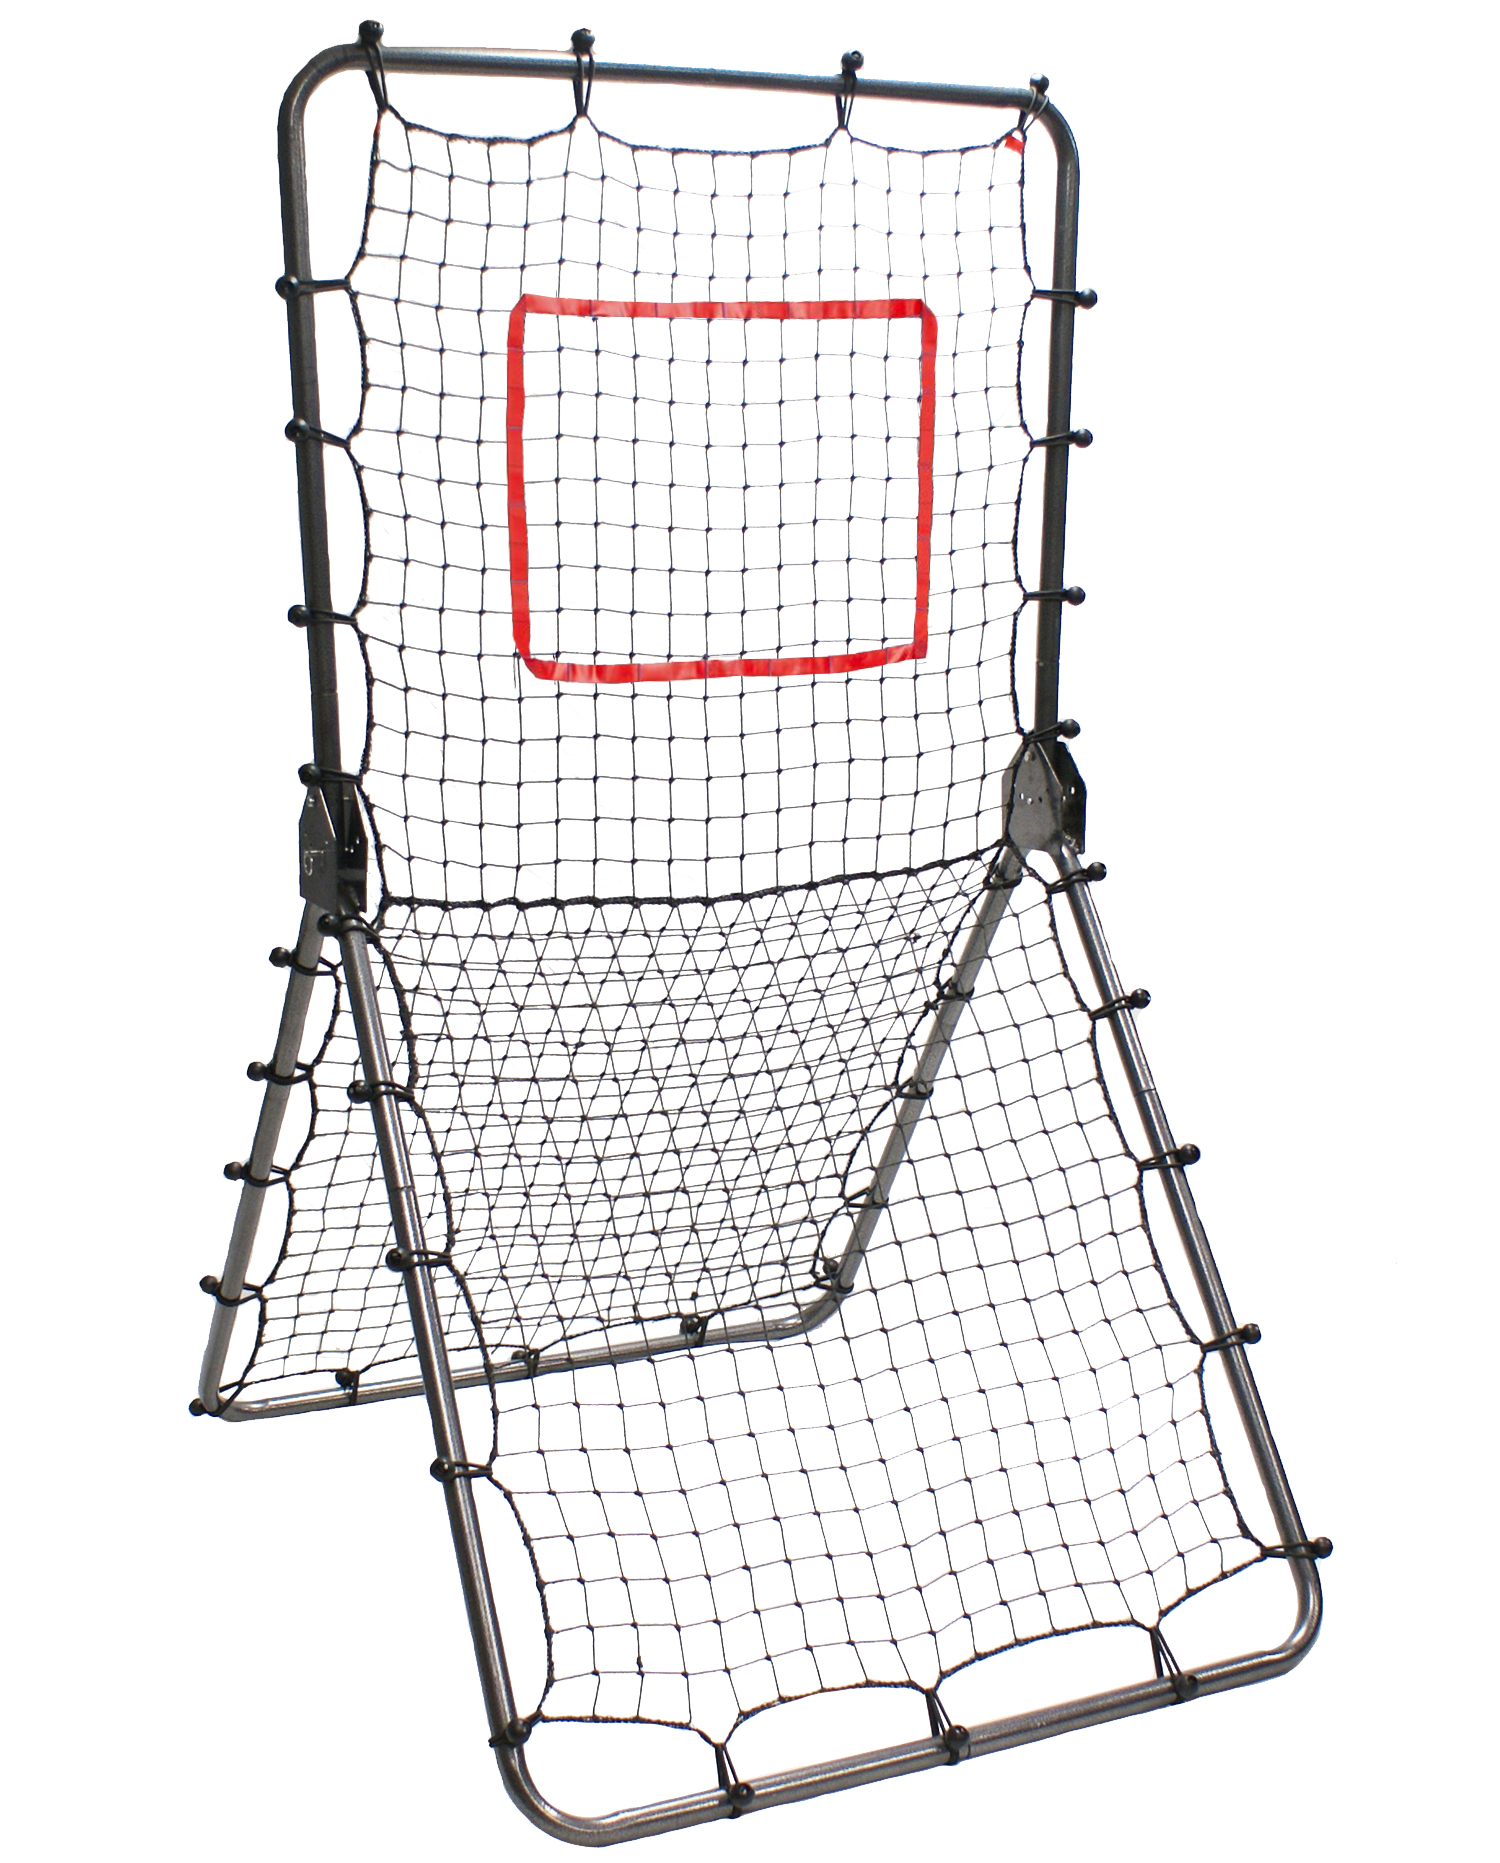 Lacrosse Pitching Catch Return Trainer Pitchback Rebounder Net Target Screen 